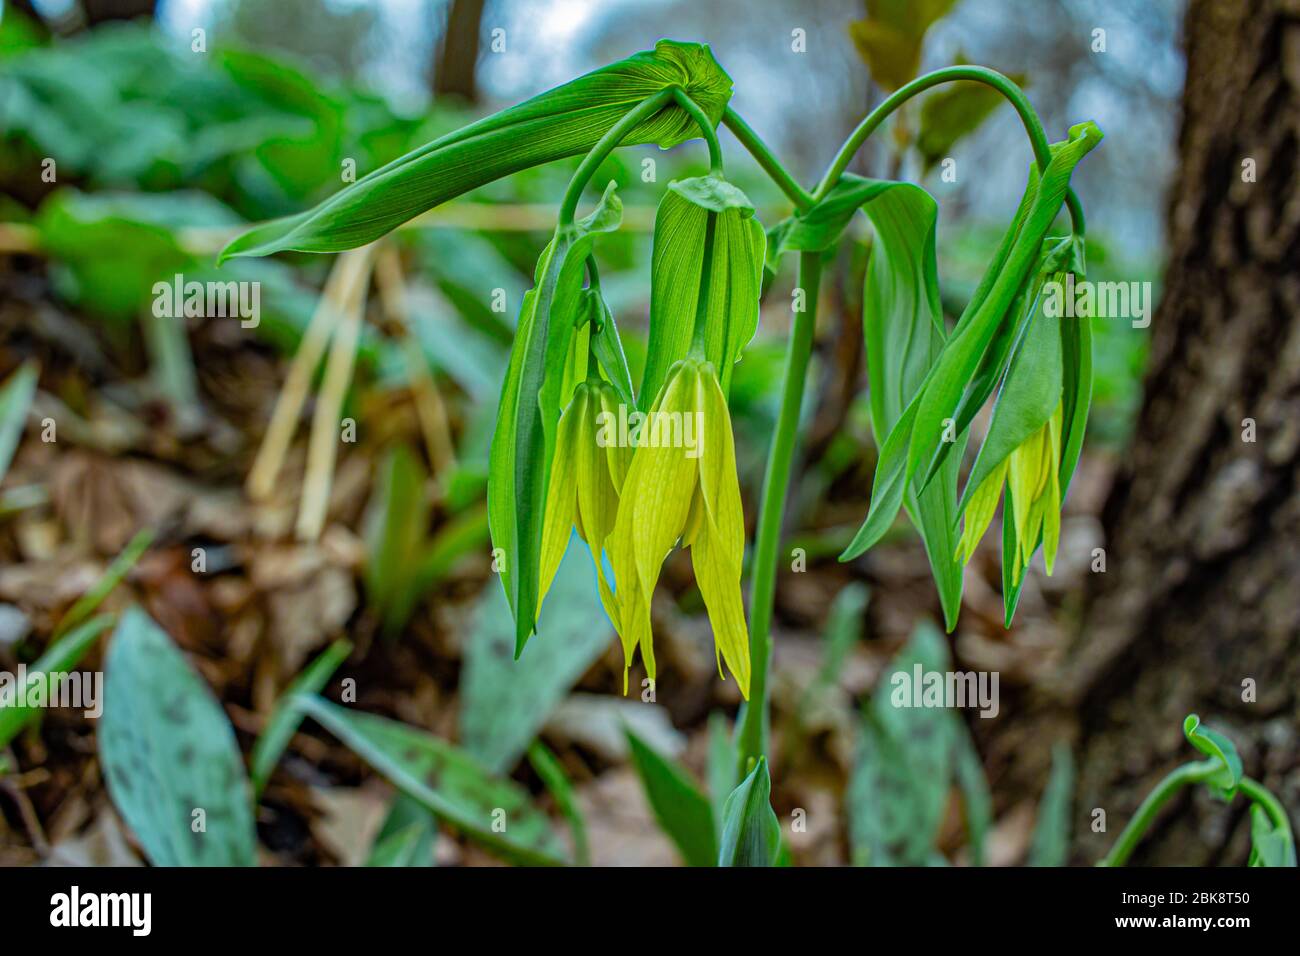 Close up view of fragile large-flowered yellow bellwort wildflowers with delicate twisted petals, growing in a woodland ravine Stock Photo